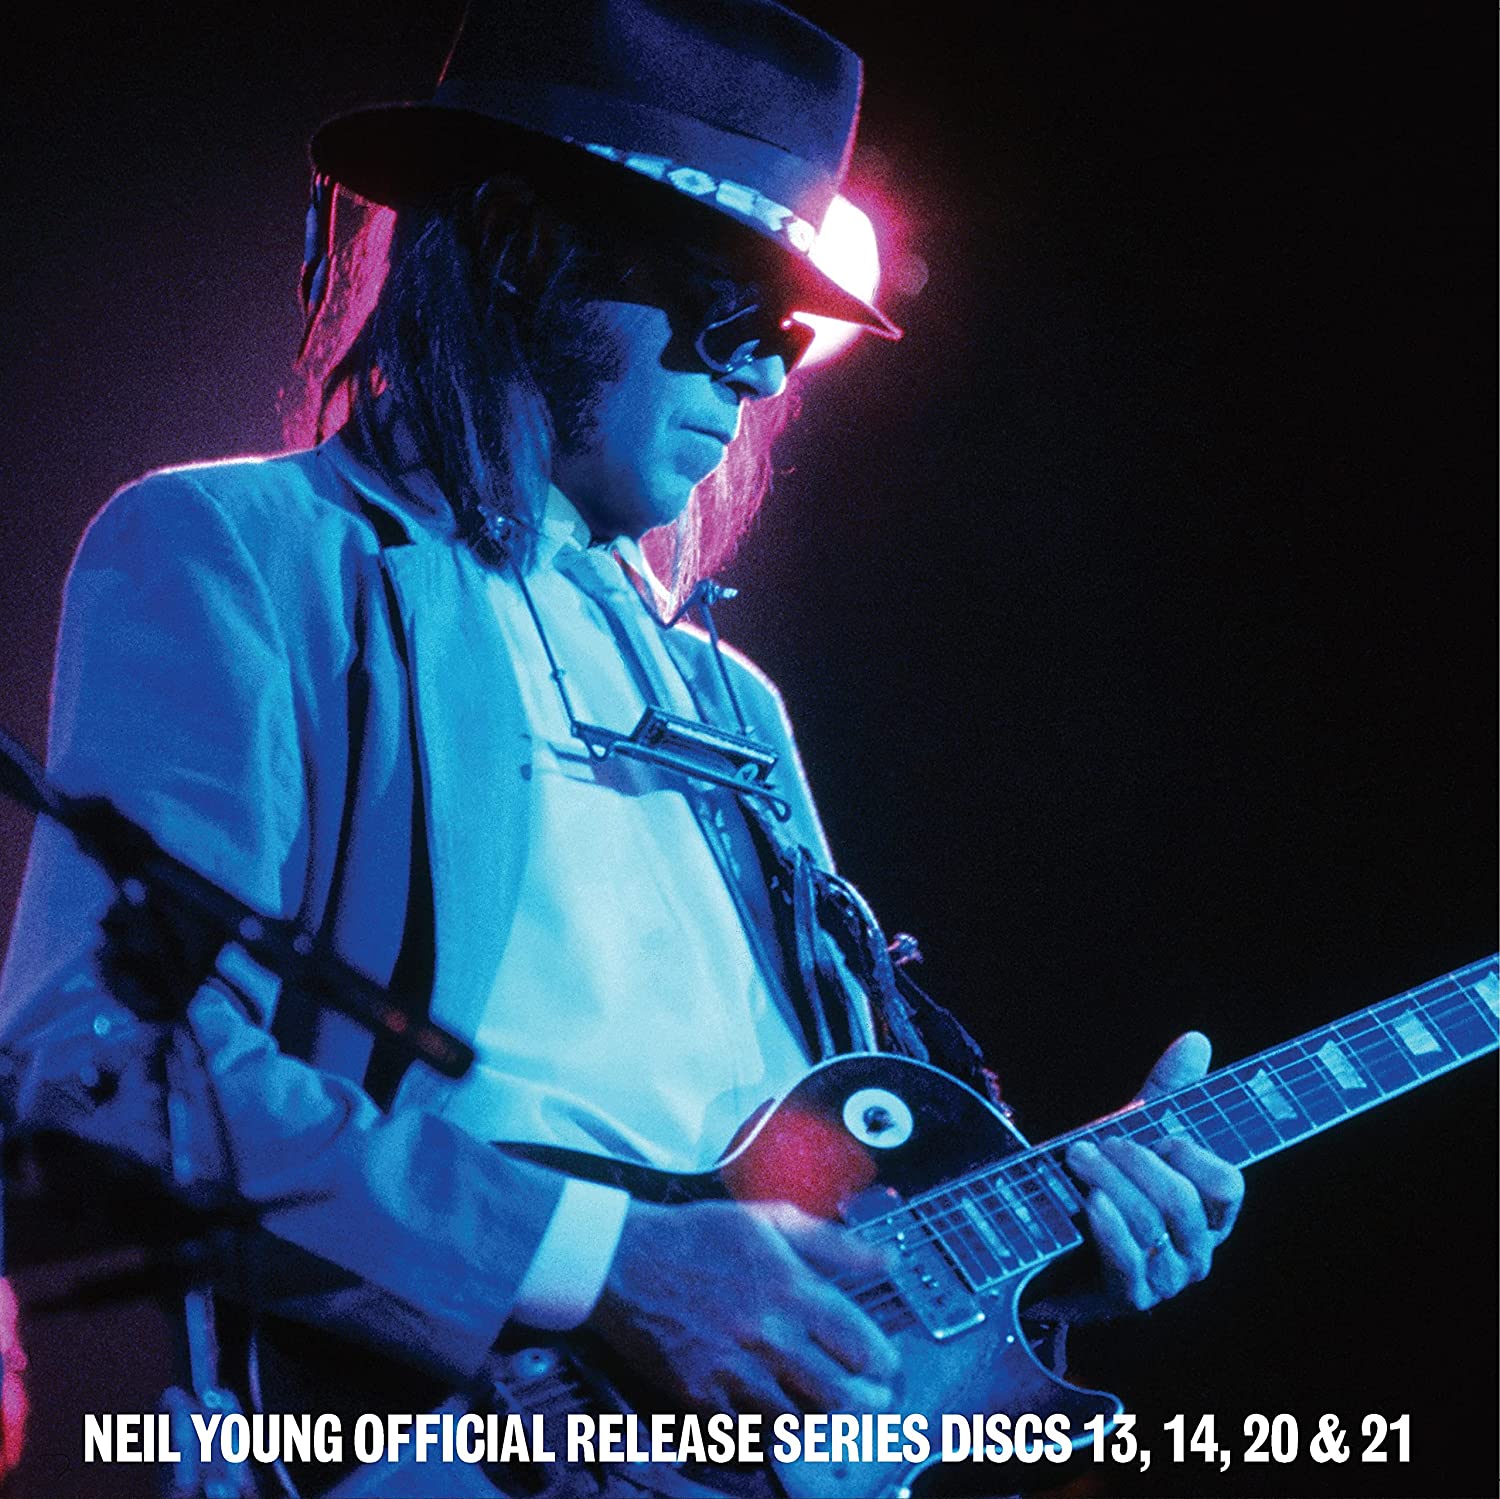 Young, Neil Official Release Series Discs 13, 14, 20 & 21 -ltd-